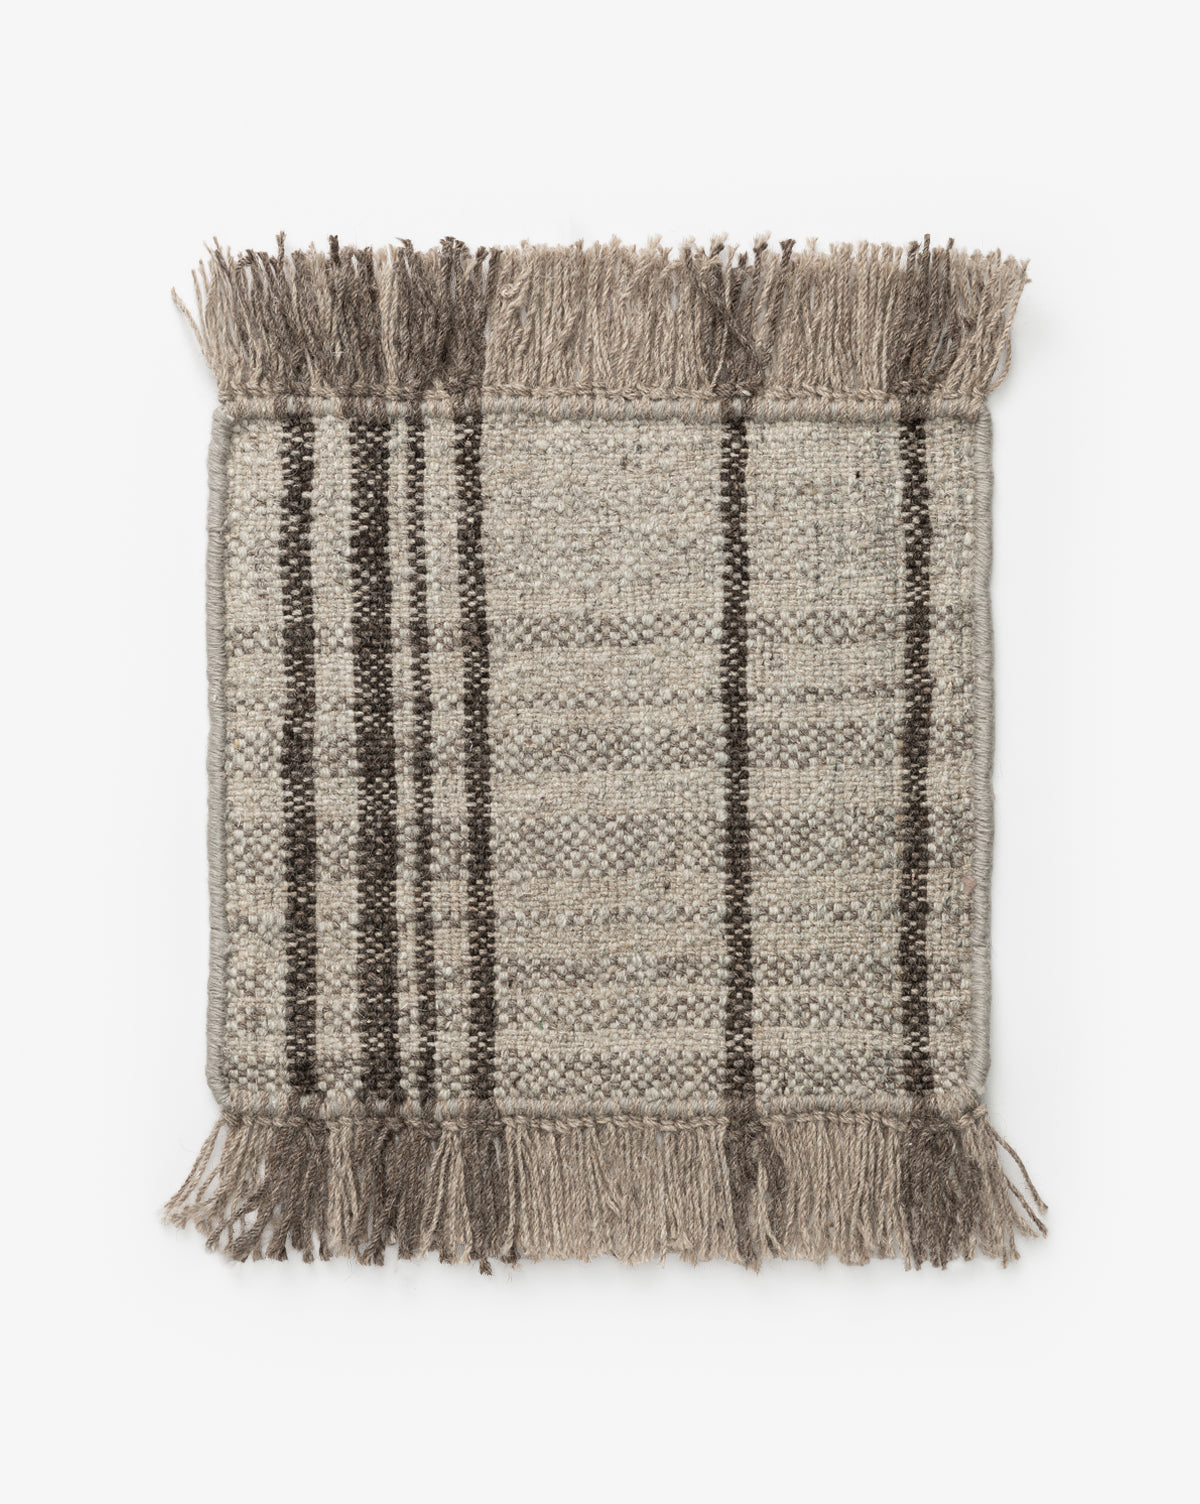 Obeetee, Searcy Handwoven Wool Rug Swatch